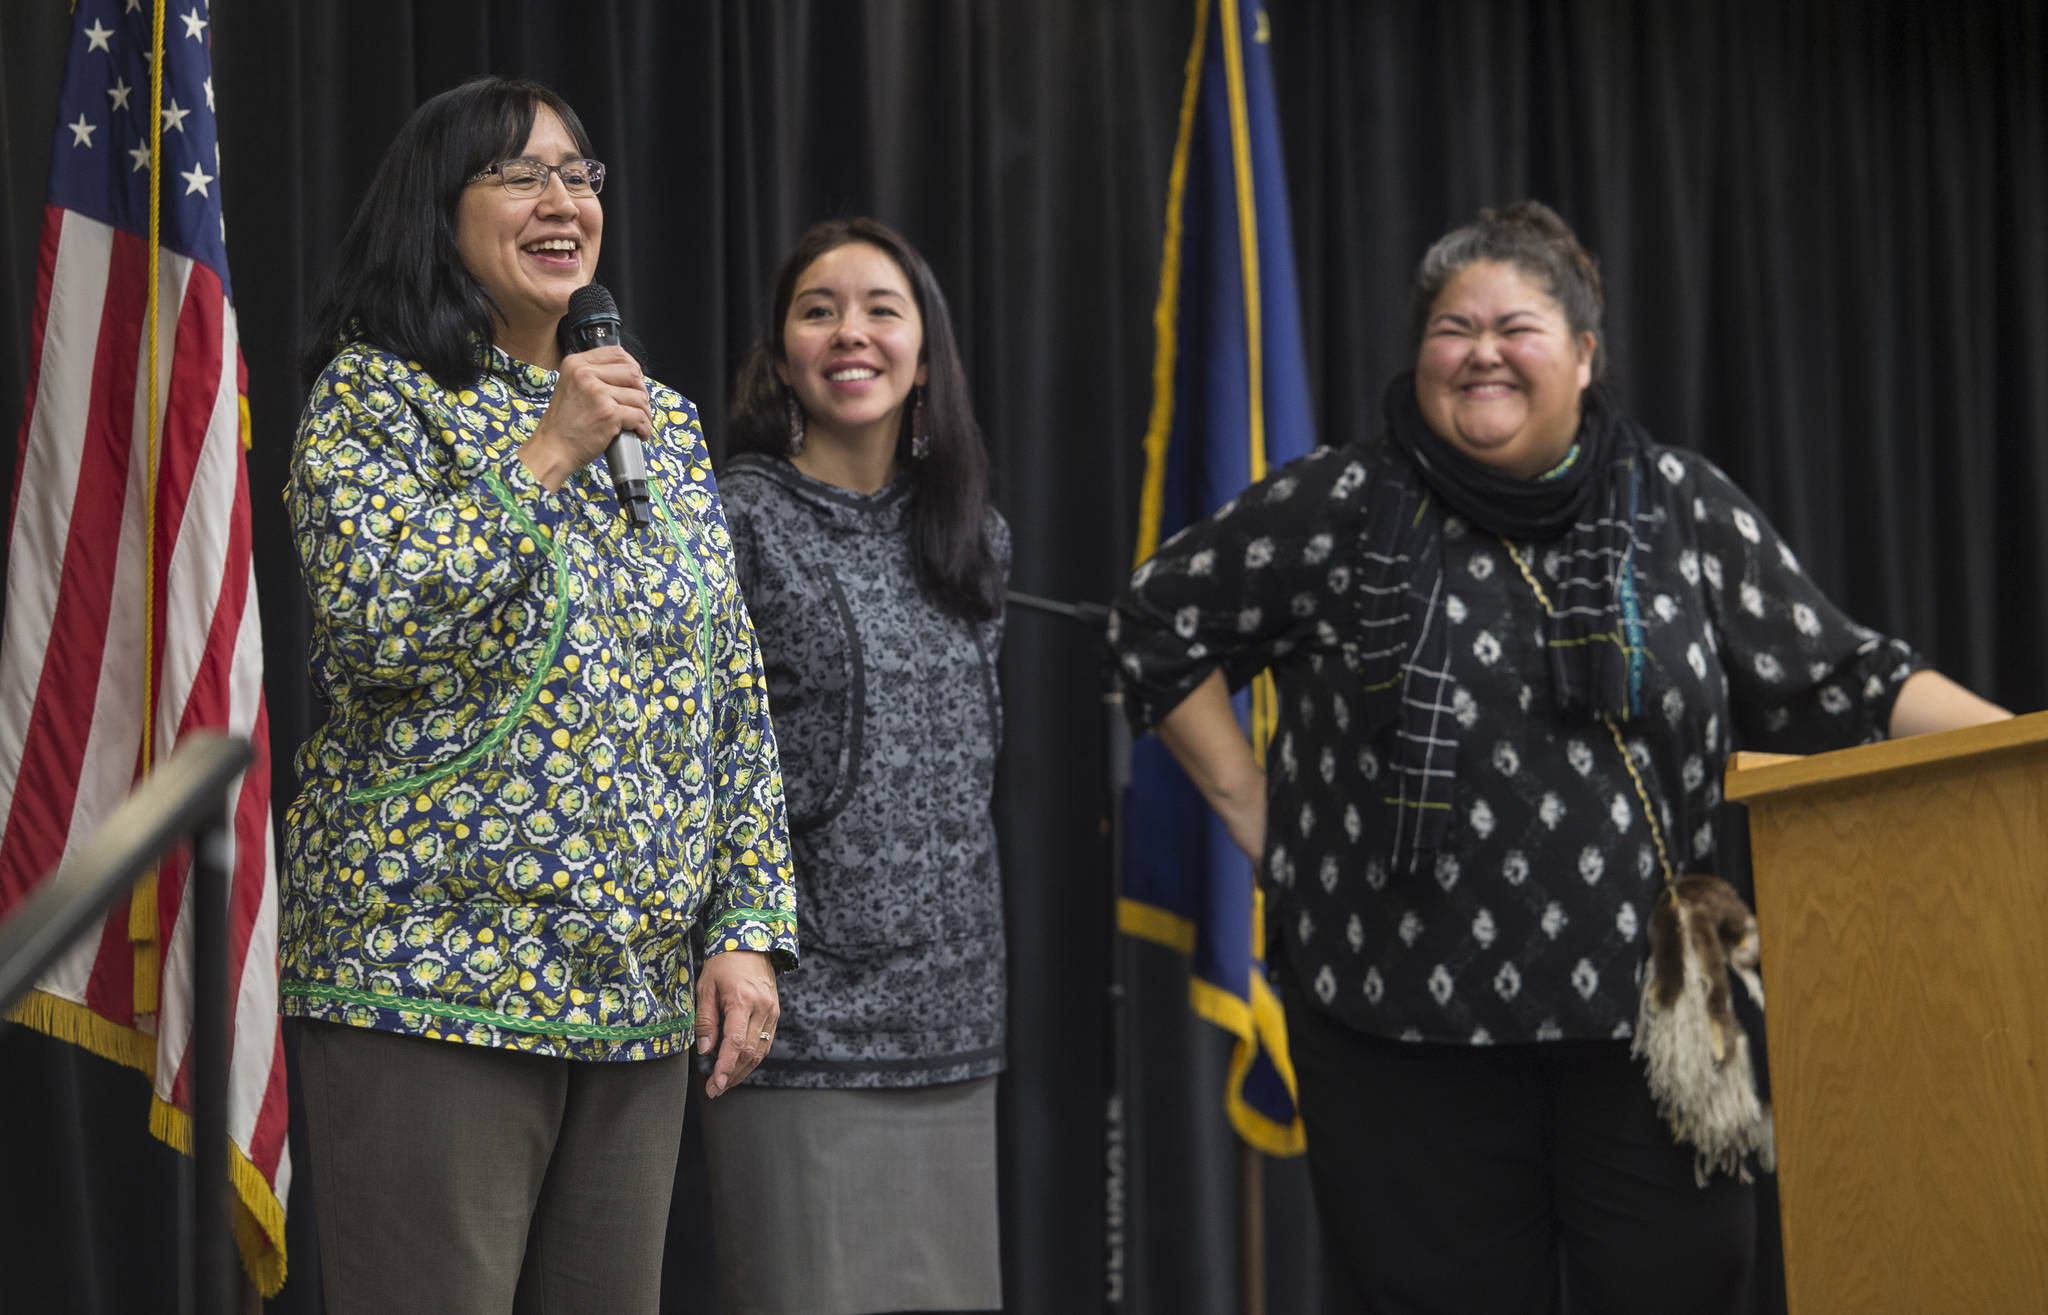 Angela Gonzalez, Indigenous Communications Manager for First Alaskans Institute, left, Andrea Sanders, director of its Native Policy Center, center, and Liz Medicine Crow, President/CEO of First Alaskans, speak at the Native Issues Forum at Elizabeth Peratrovich Hall on Thursday. (Michael Penn | Juneau Empire)